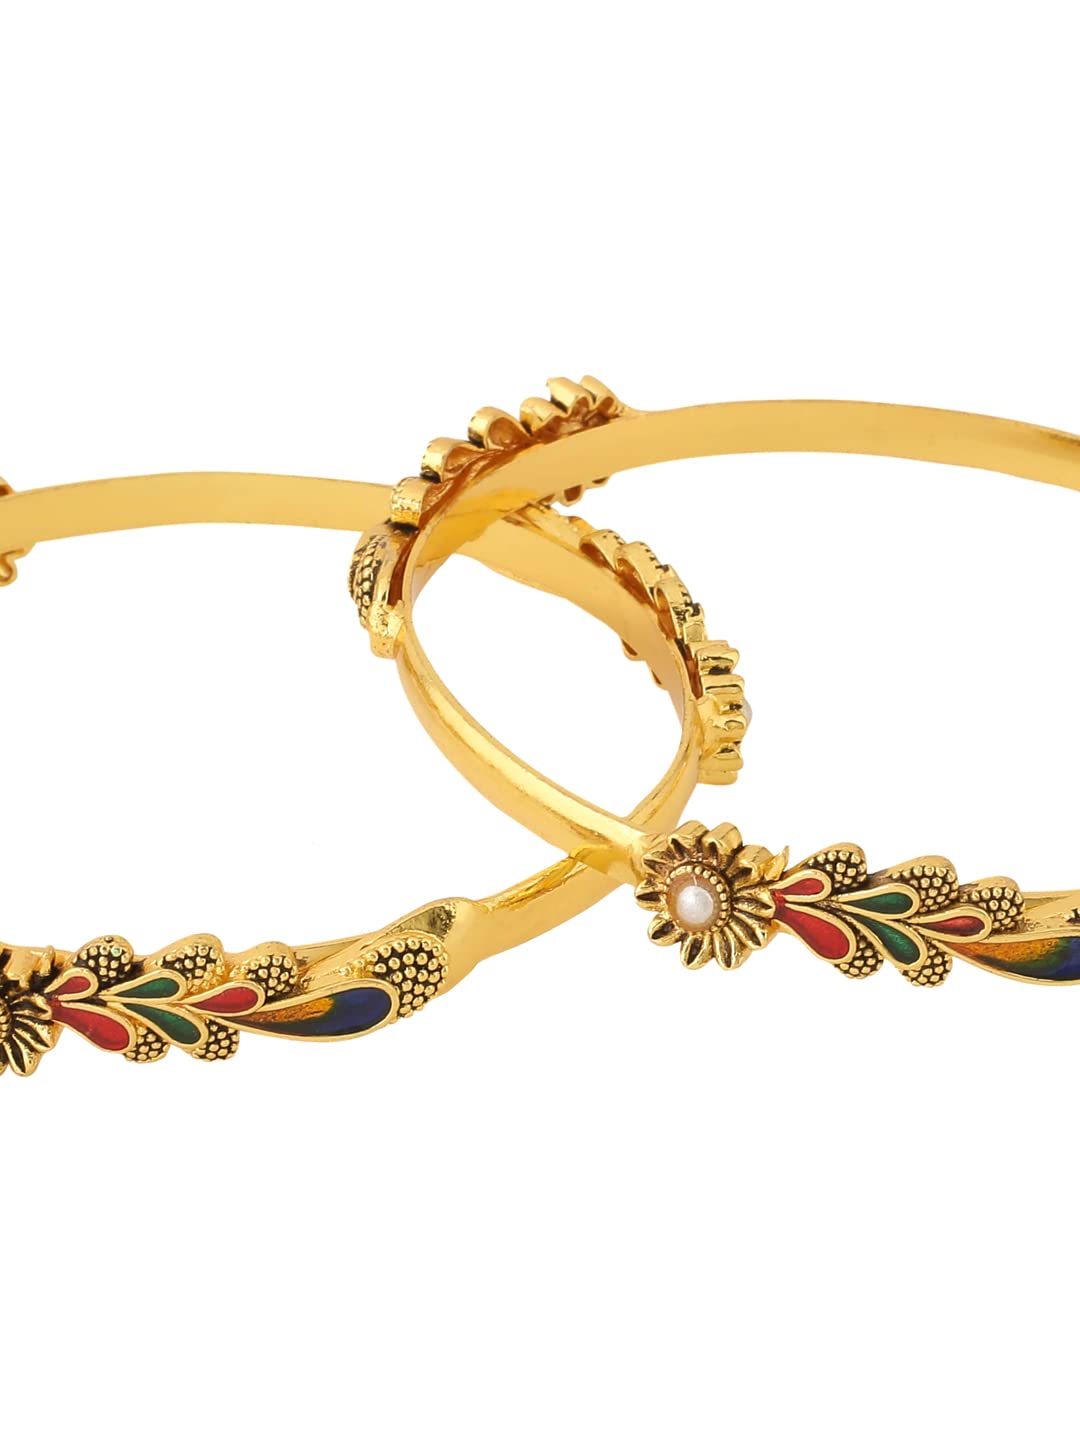 Yellow Chimes Bangles for Women Gold Toned Floral Designed Meenakari Touch Traditional Bangles for Women and Girls